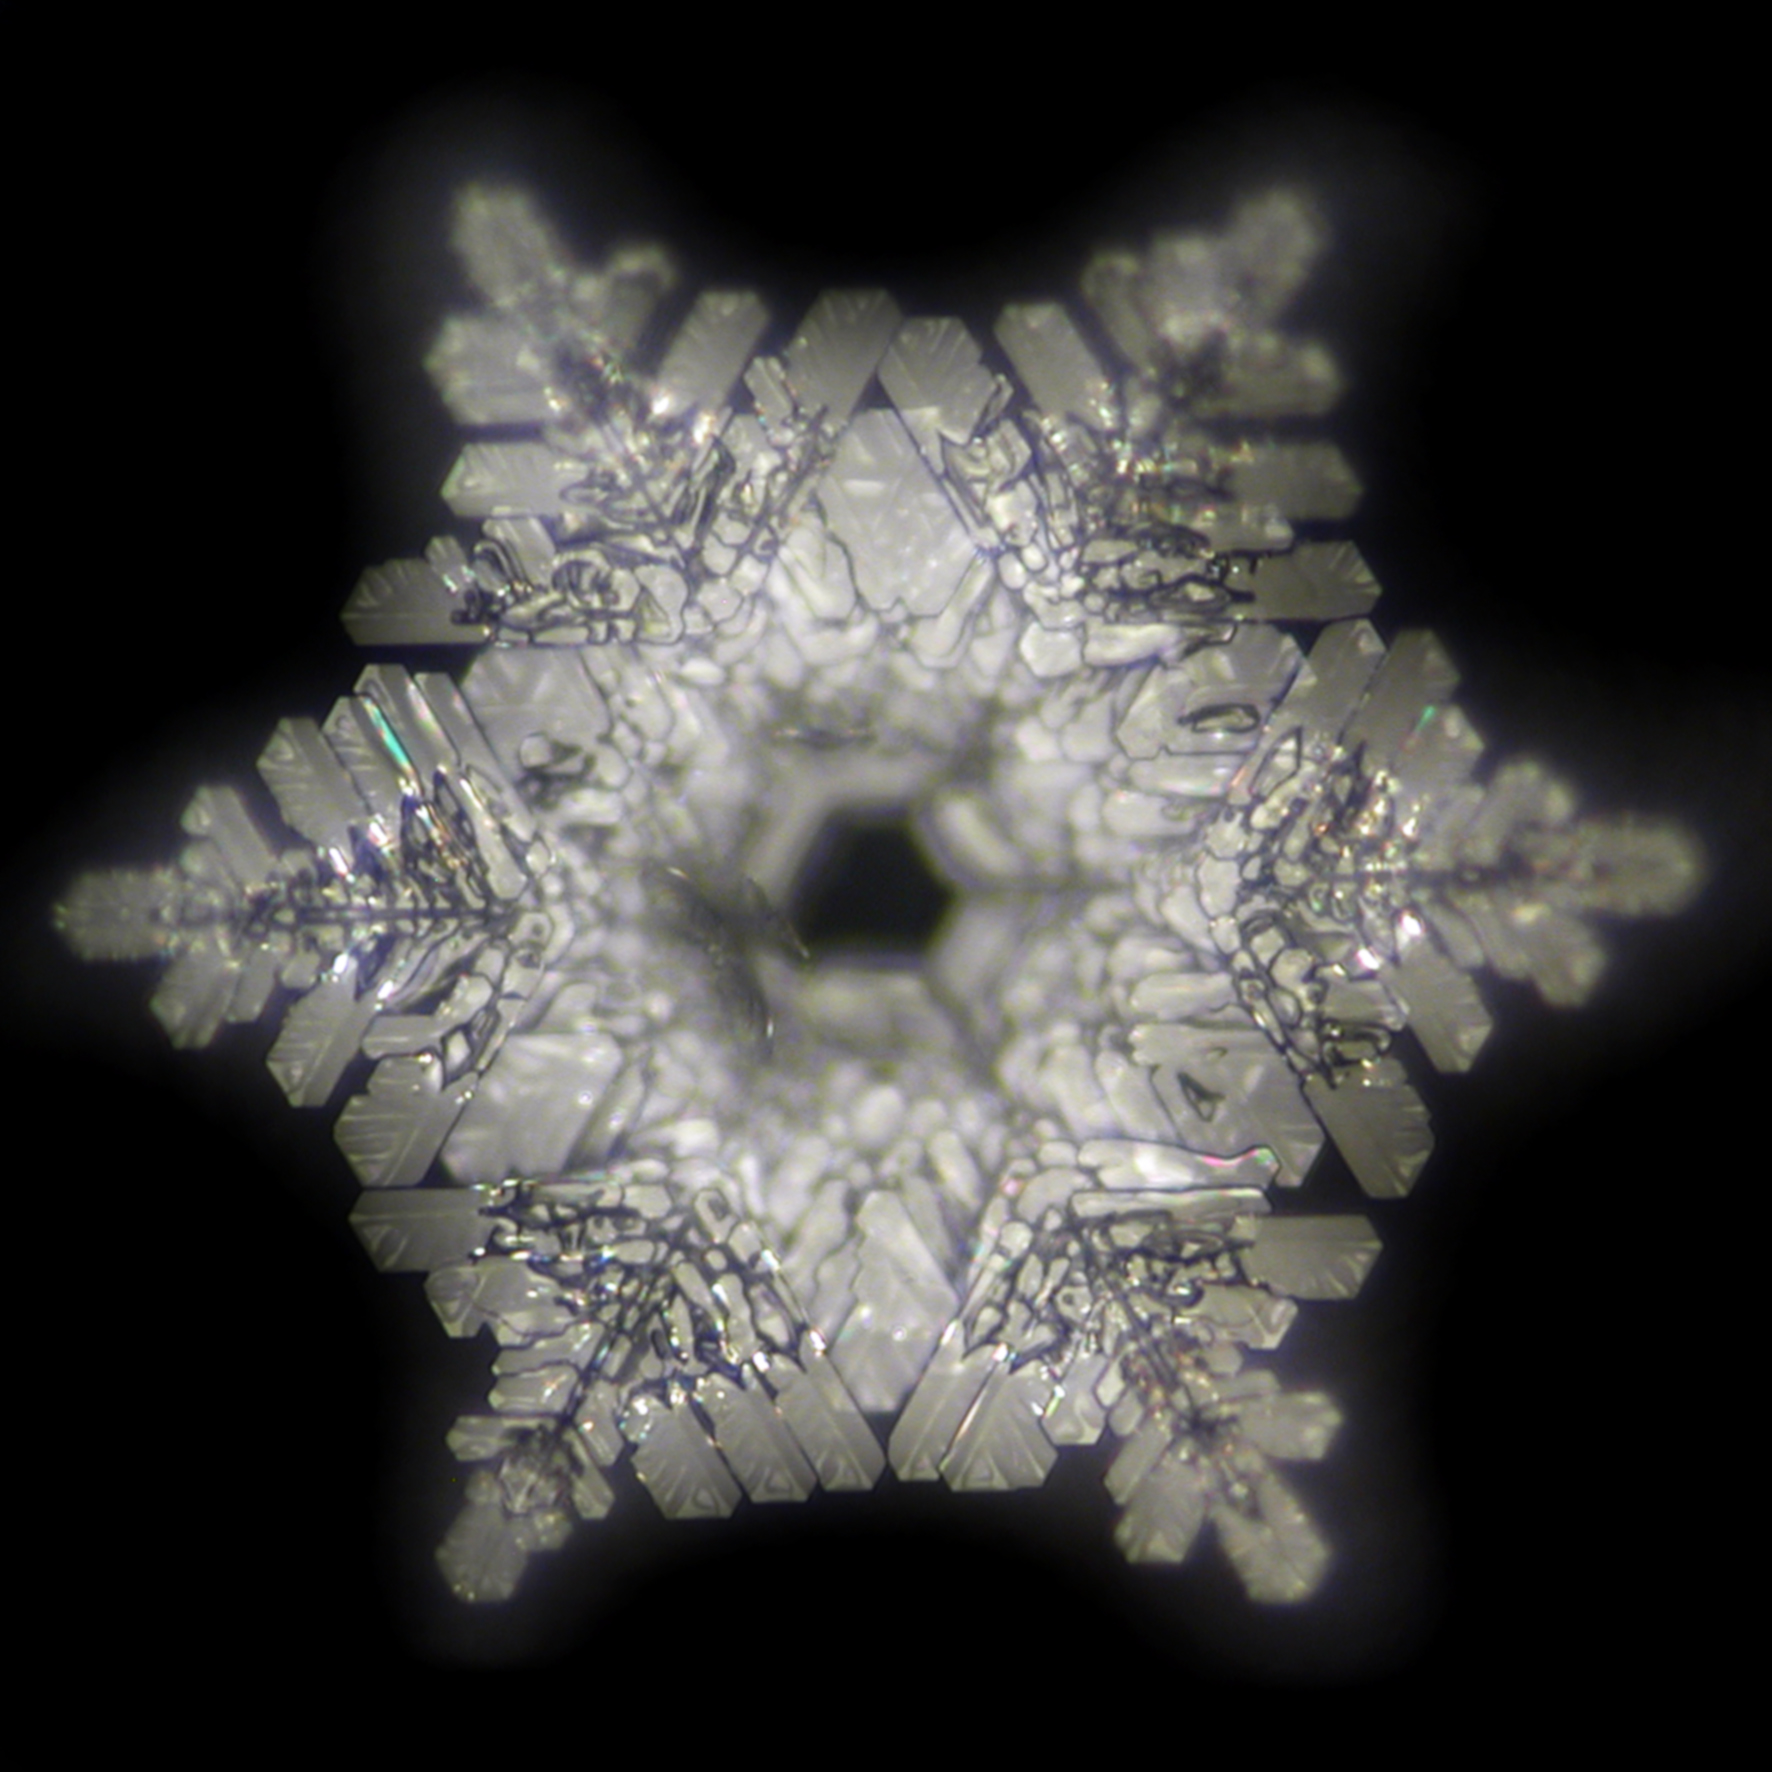 Water crystal image after exposure to a Mini-WaterTuner from Swiss Harmony